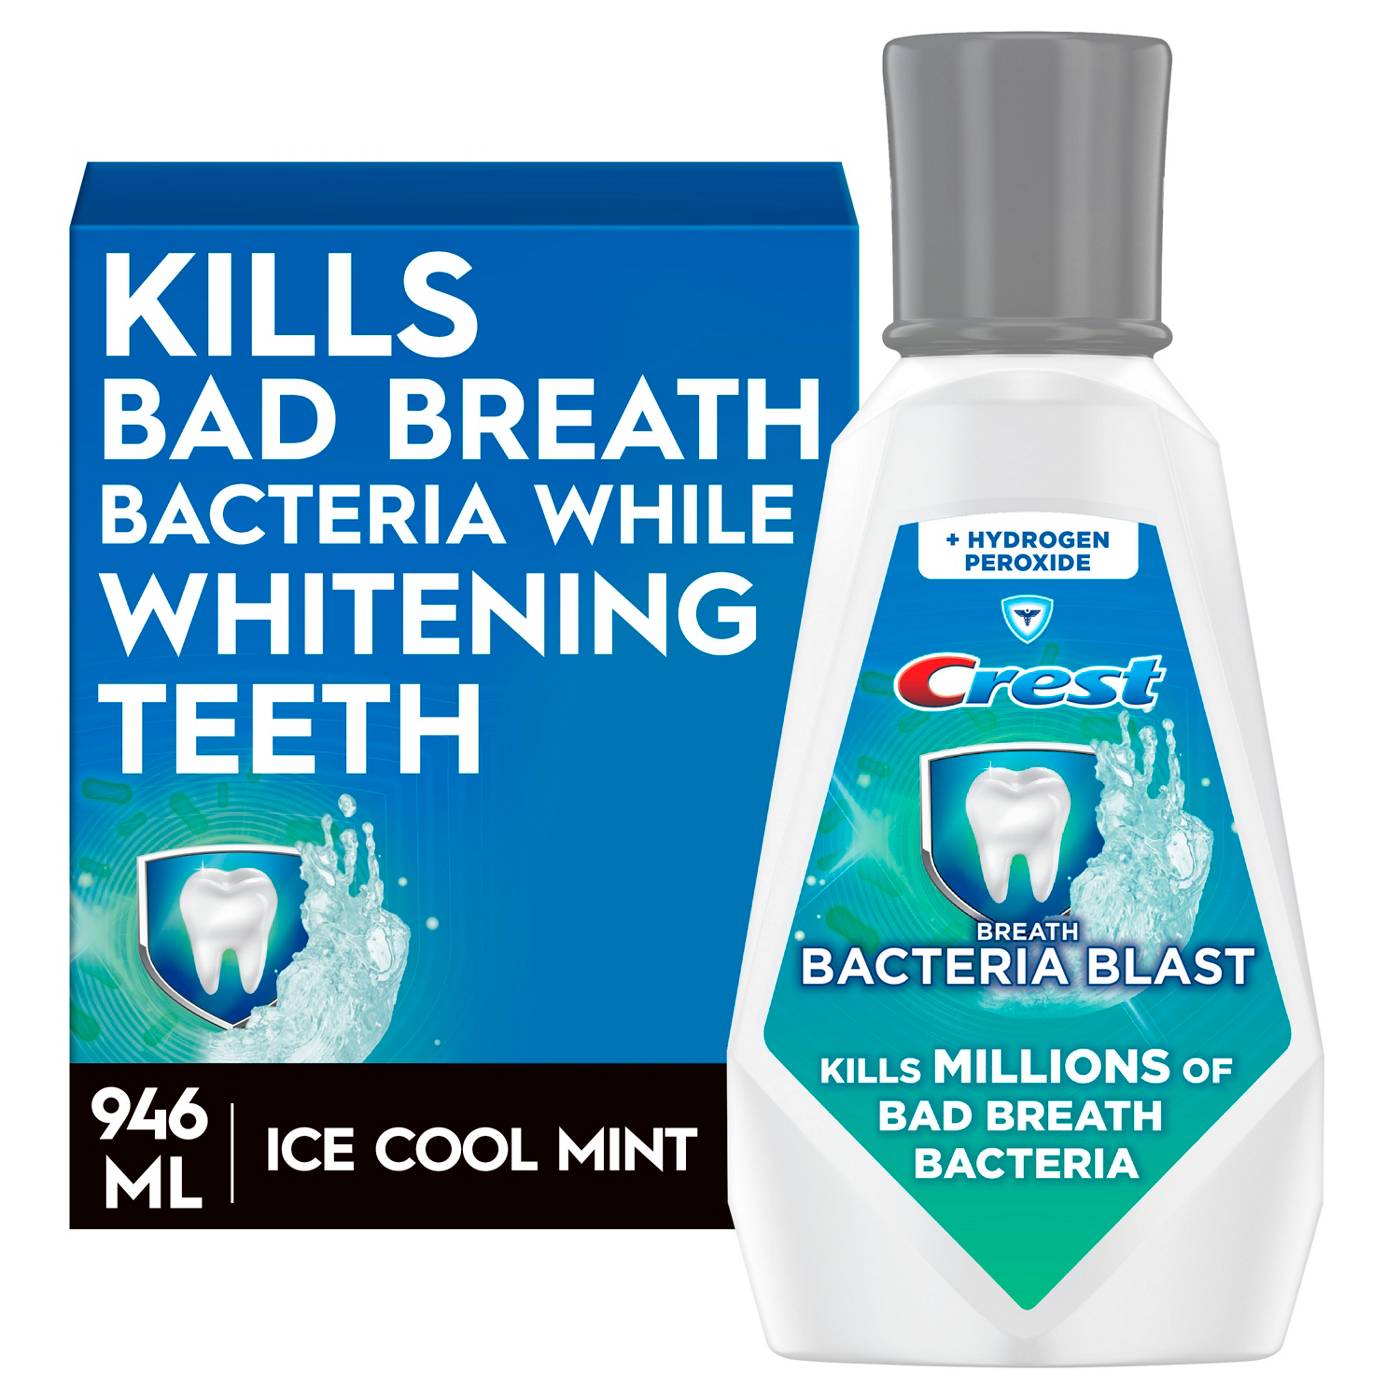 Crest Breath Bacteria Blast Mouthwash - Icy Cool Mint; image 8 of 9